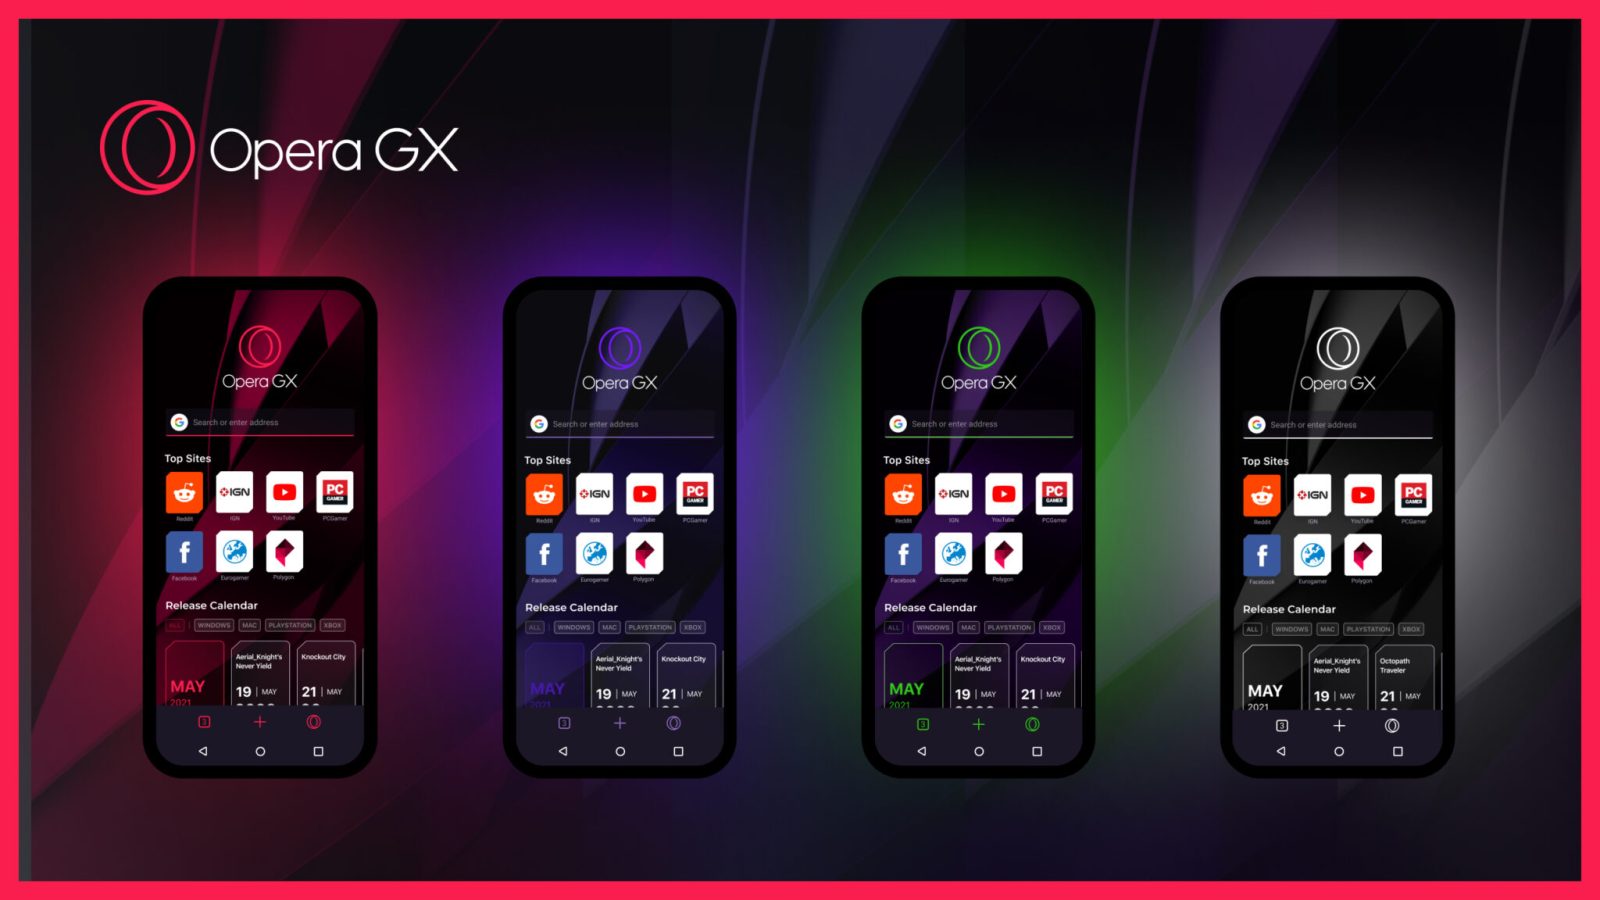 A new web browser to game on, Opera GX now available on mobile